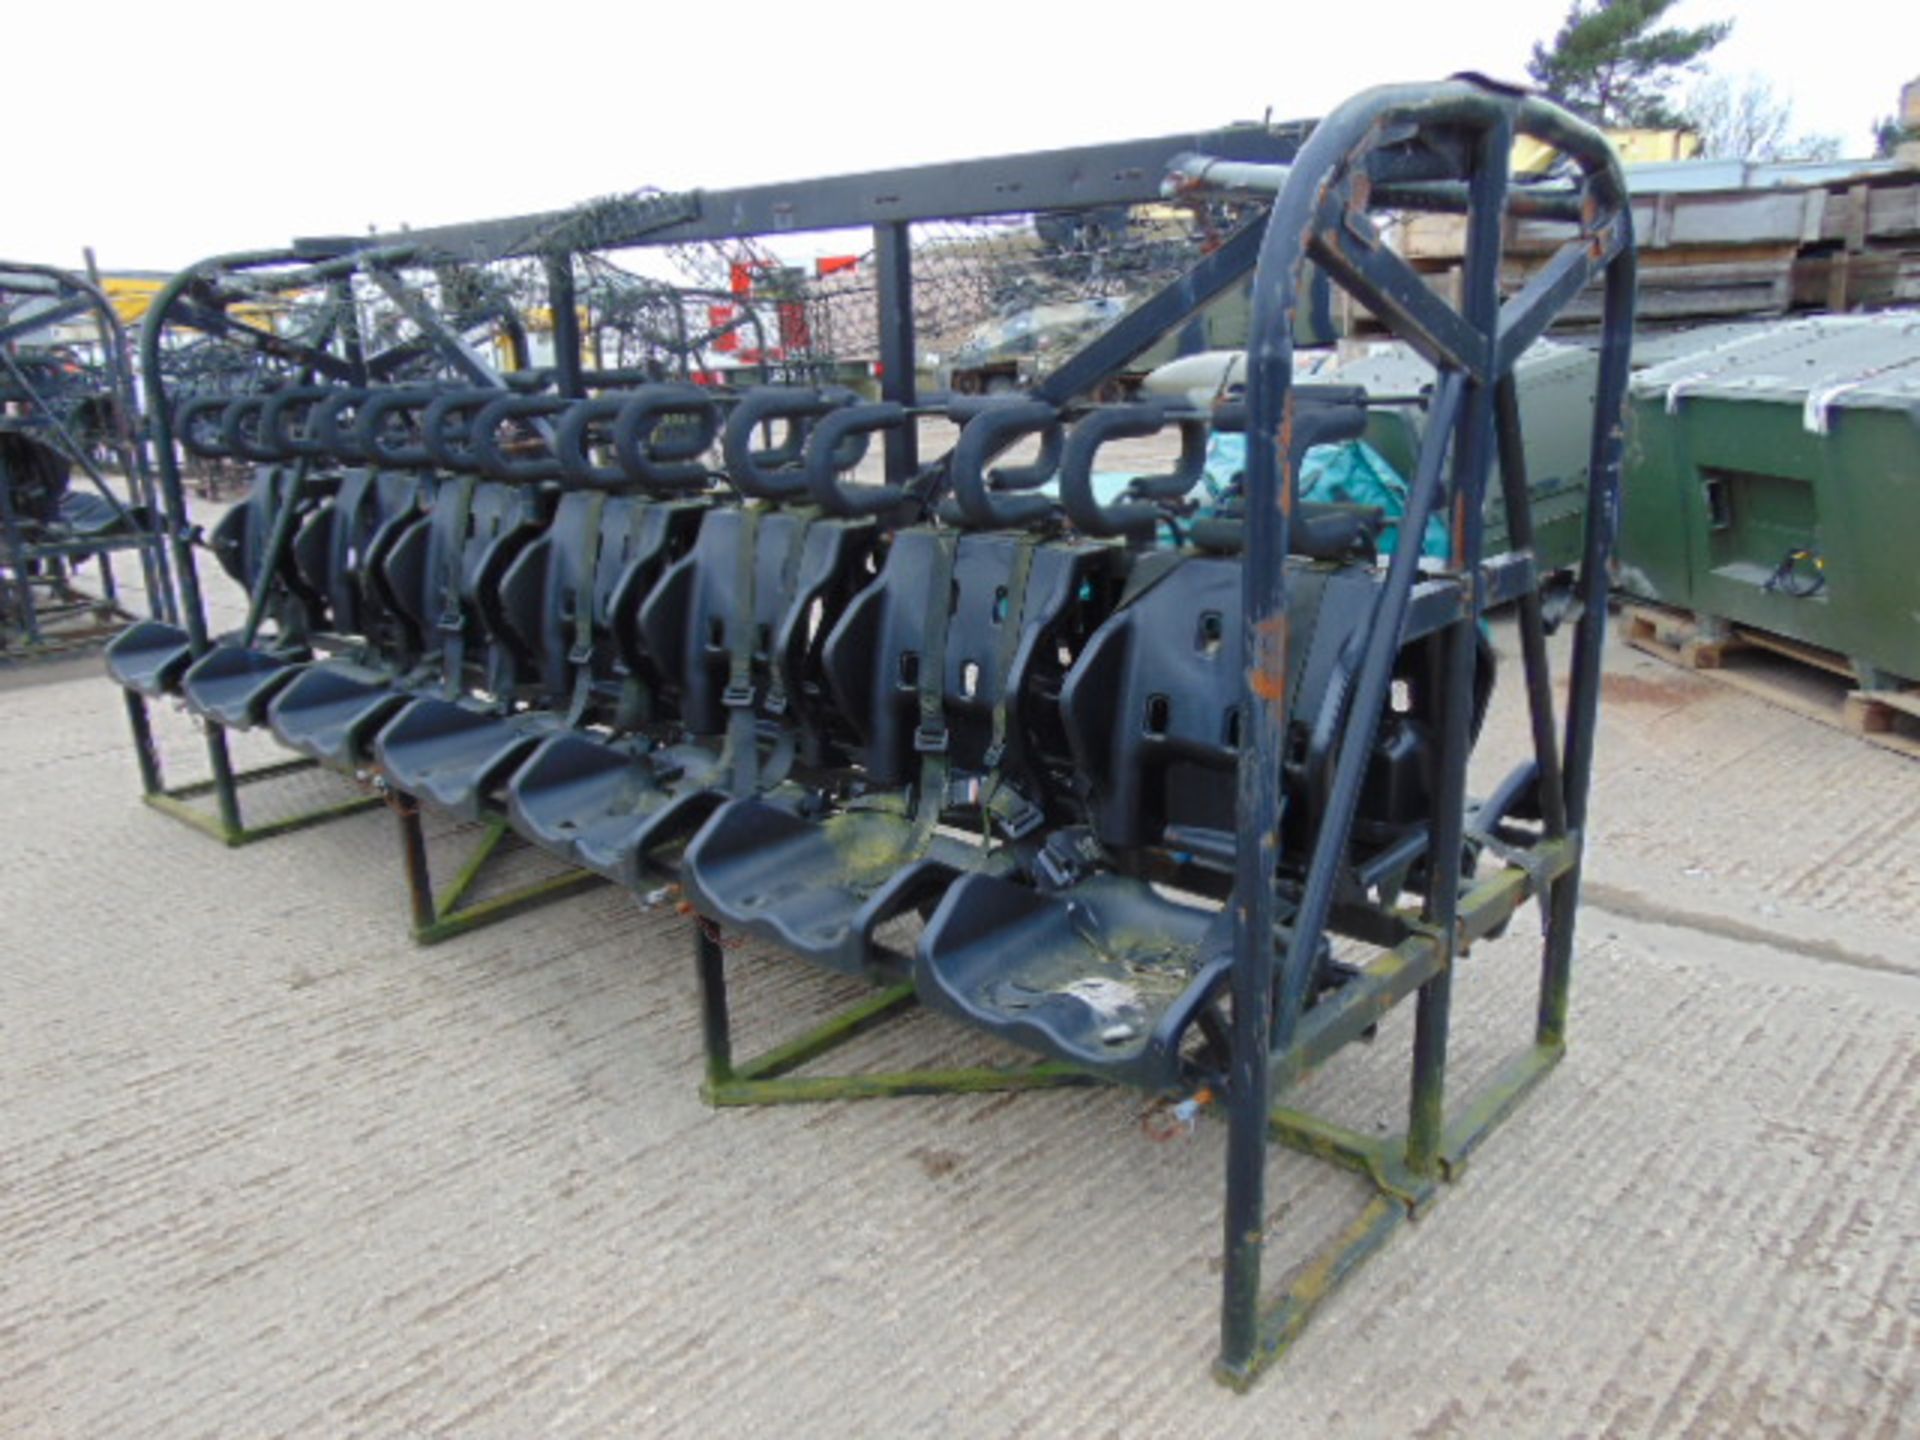 14 Man ROPS Security Seat suitable for Leyland Dafs, Bedfords etc - Image 2 of 5